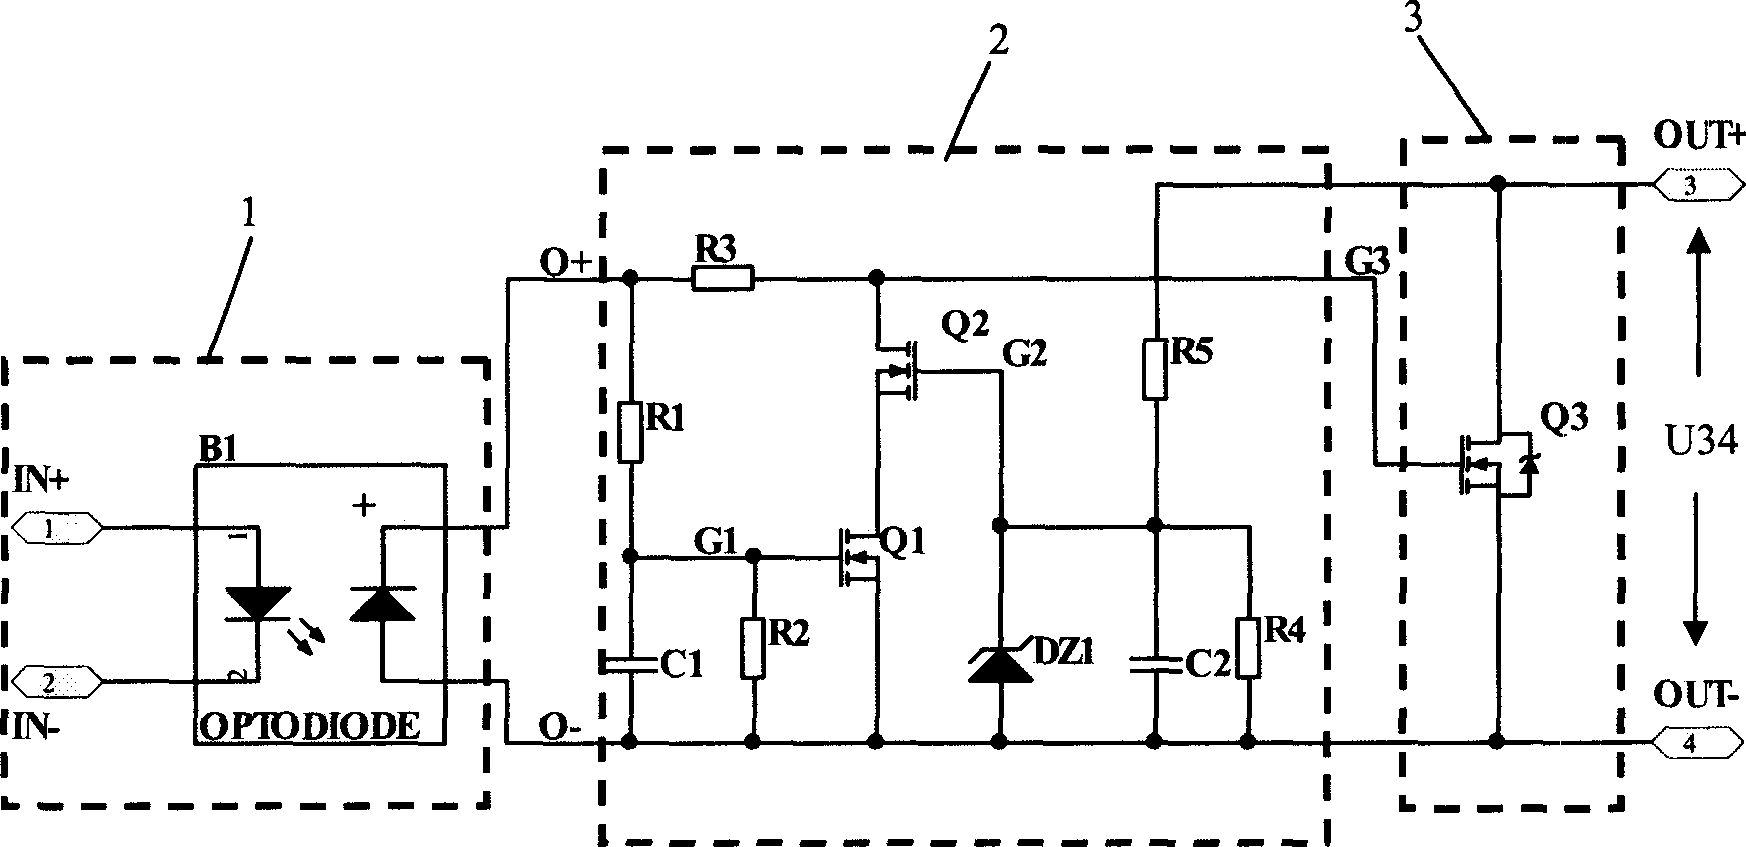 Dc solid-state relay